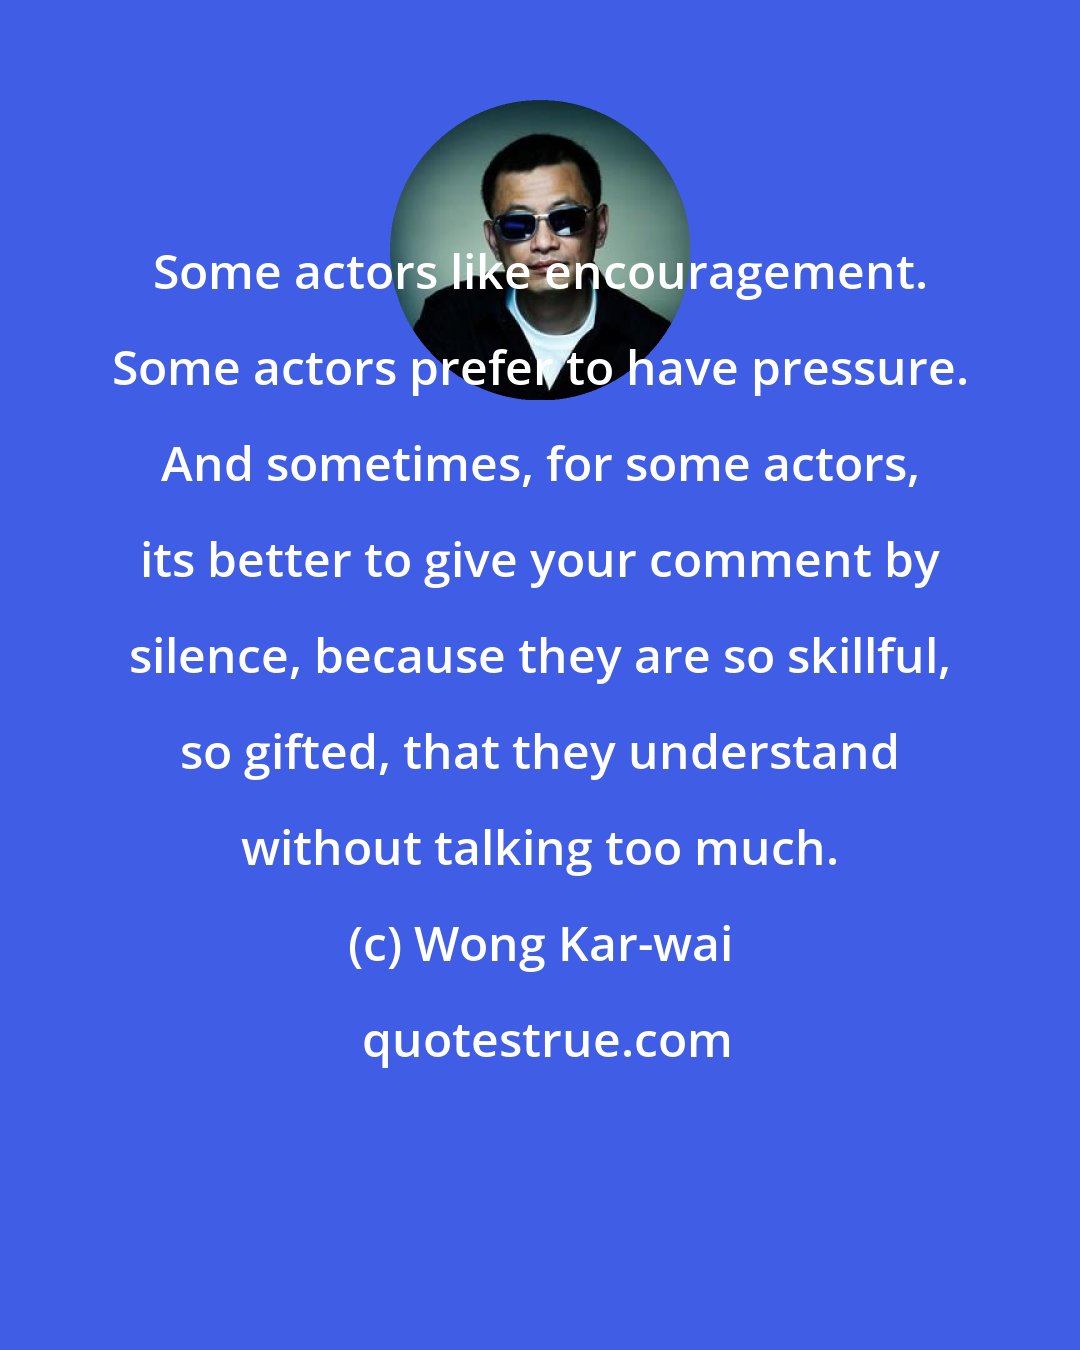 Wong Kar-wai: Some actors like encouragement. Some actors prefer to have pressure. And sometimes, for some actors, its better to give your comment by silence, because they are so skillful, so gifted, that they understand without talking too much.